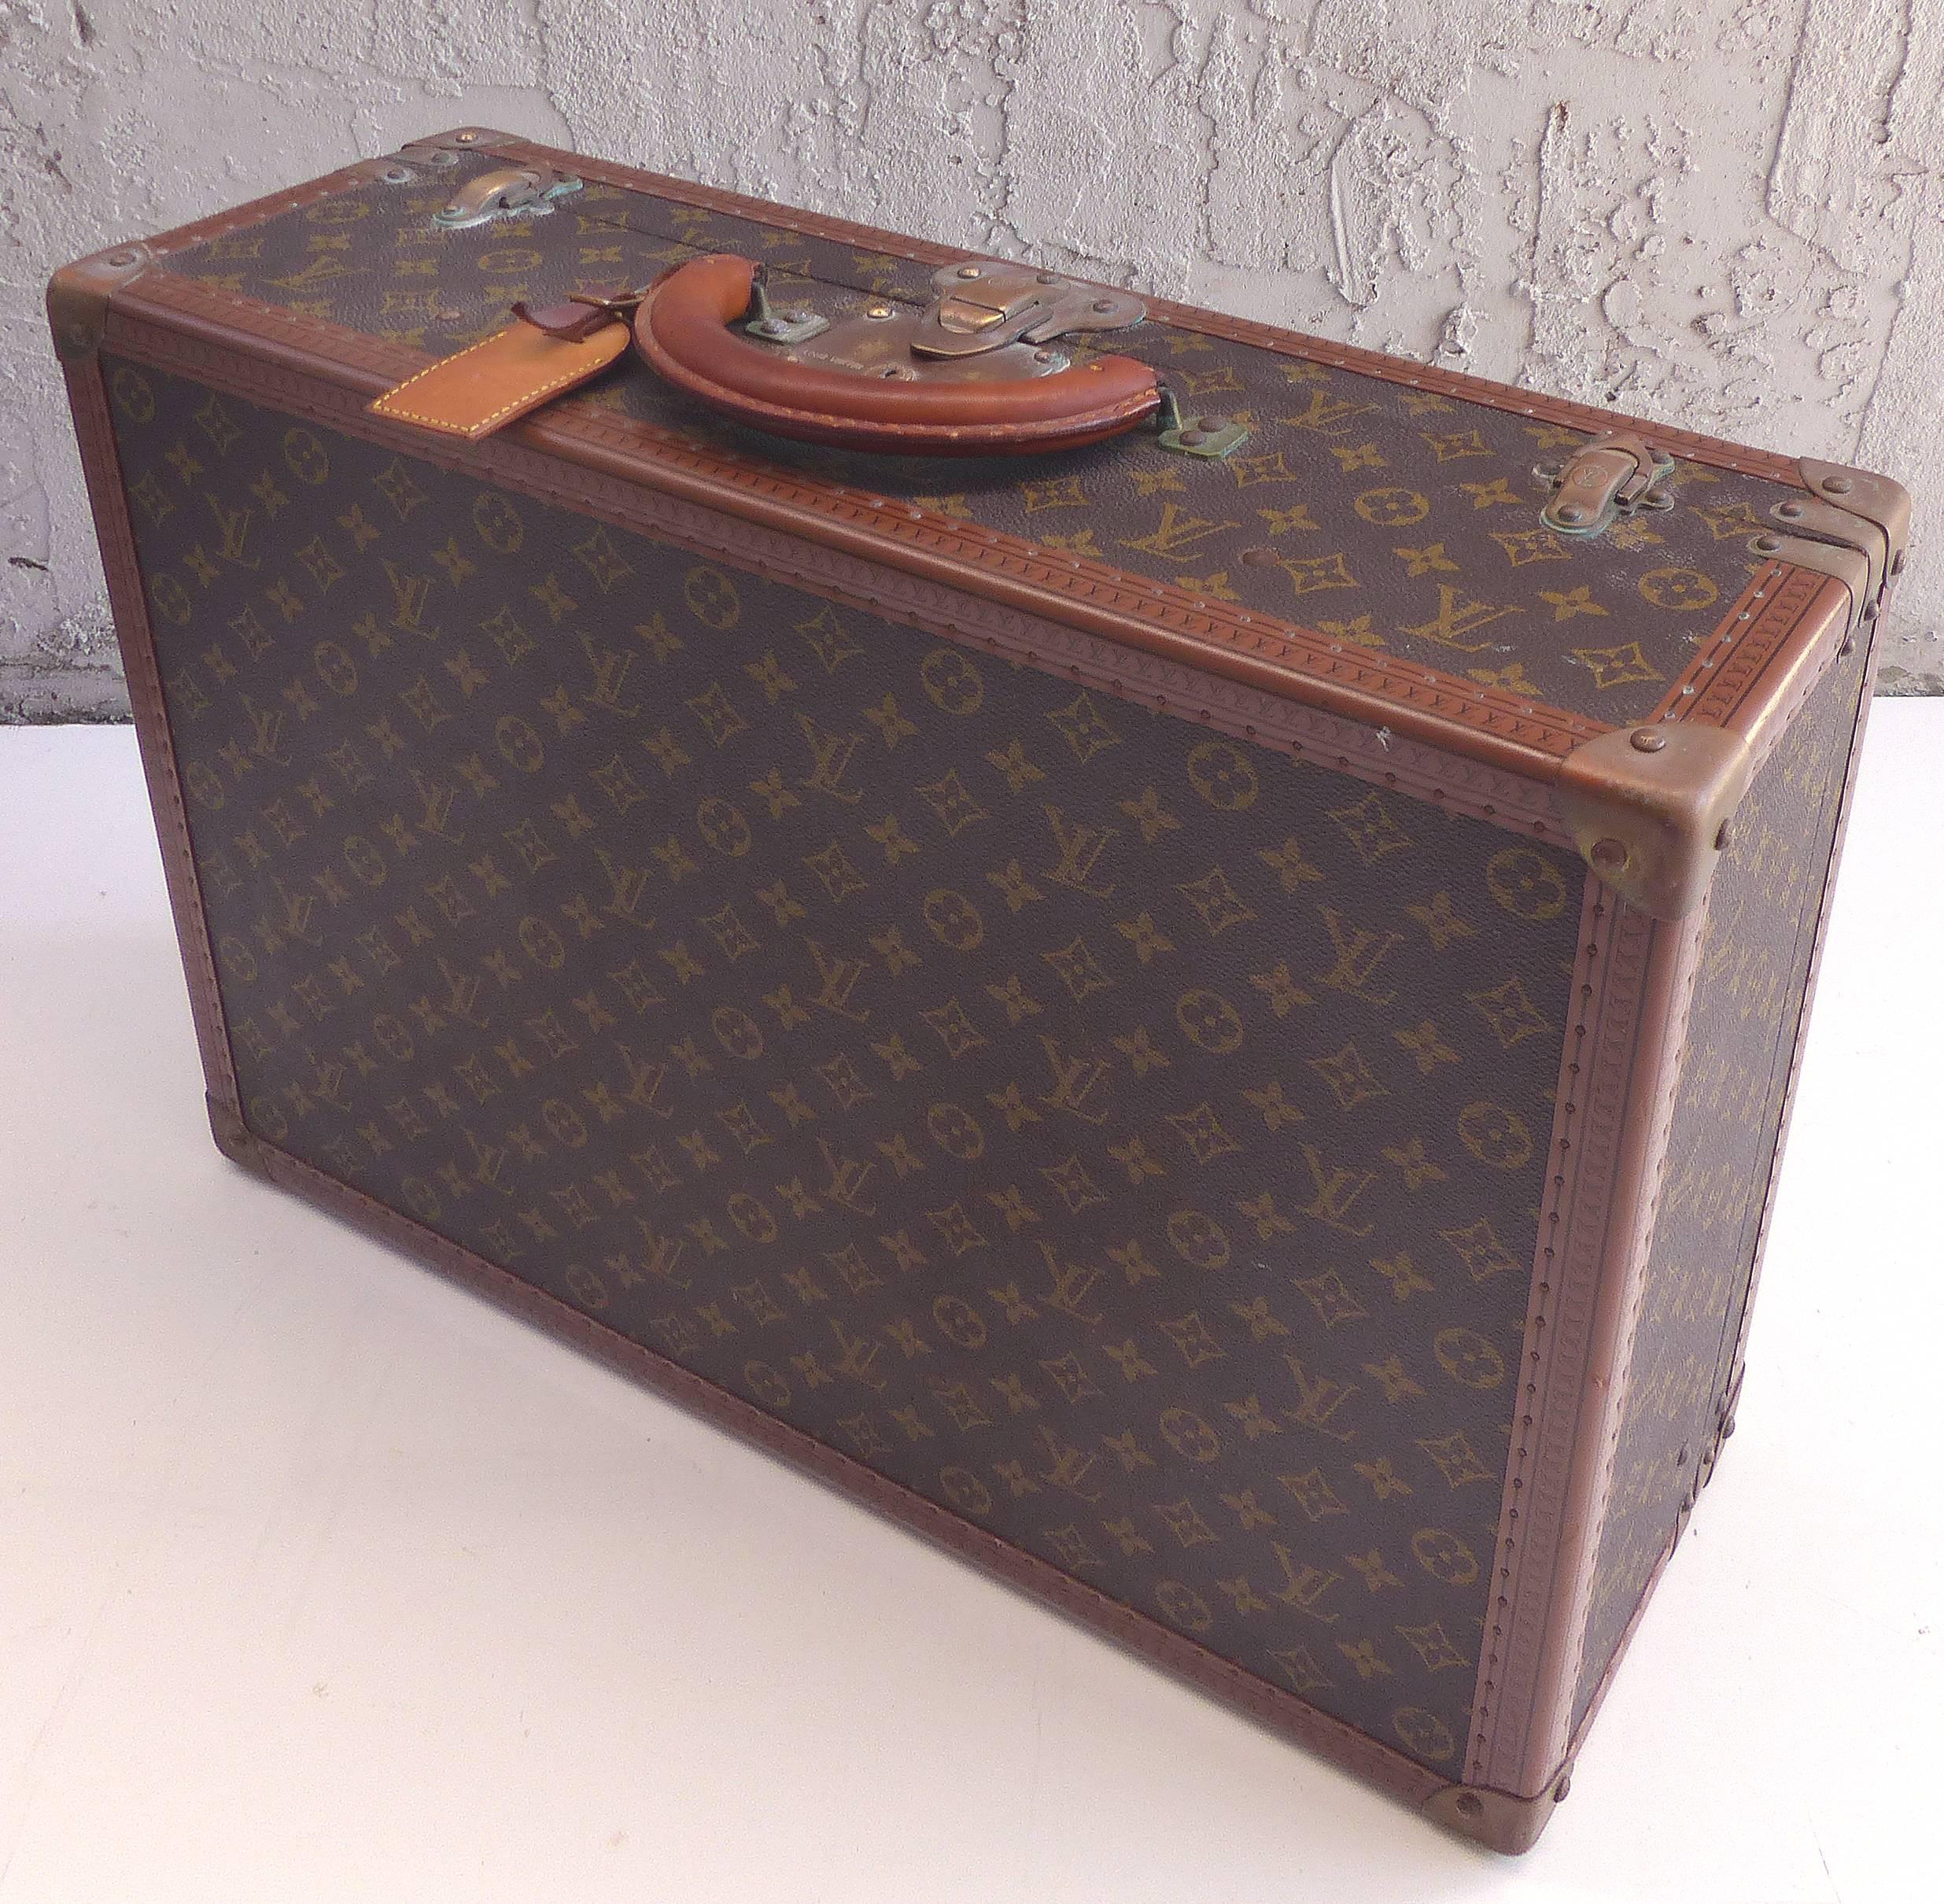 Small Louis Vuitton Hard Case Suitcase, circa 1950s

Offered for sale is a small overhead size Louis Vuitton hard case suitcase from the 1950s. The interior serial number is # 963811 and is marked Ave Marceau 78 bis, Paris. Also marked Nice - 2 Ave